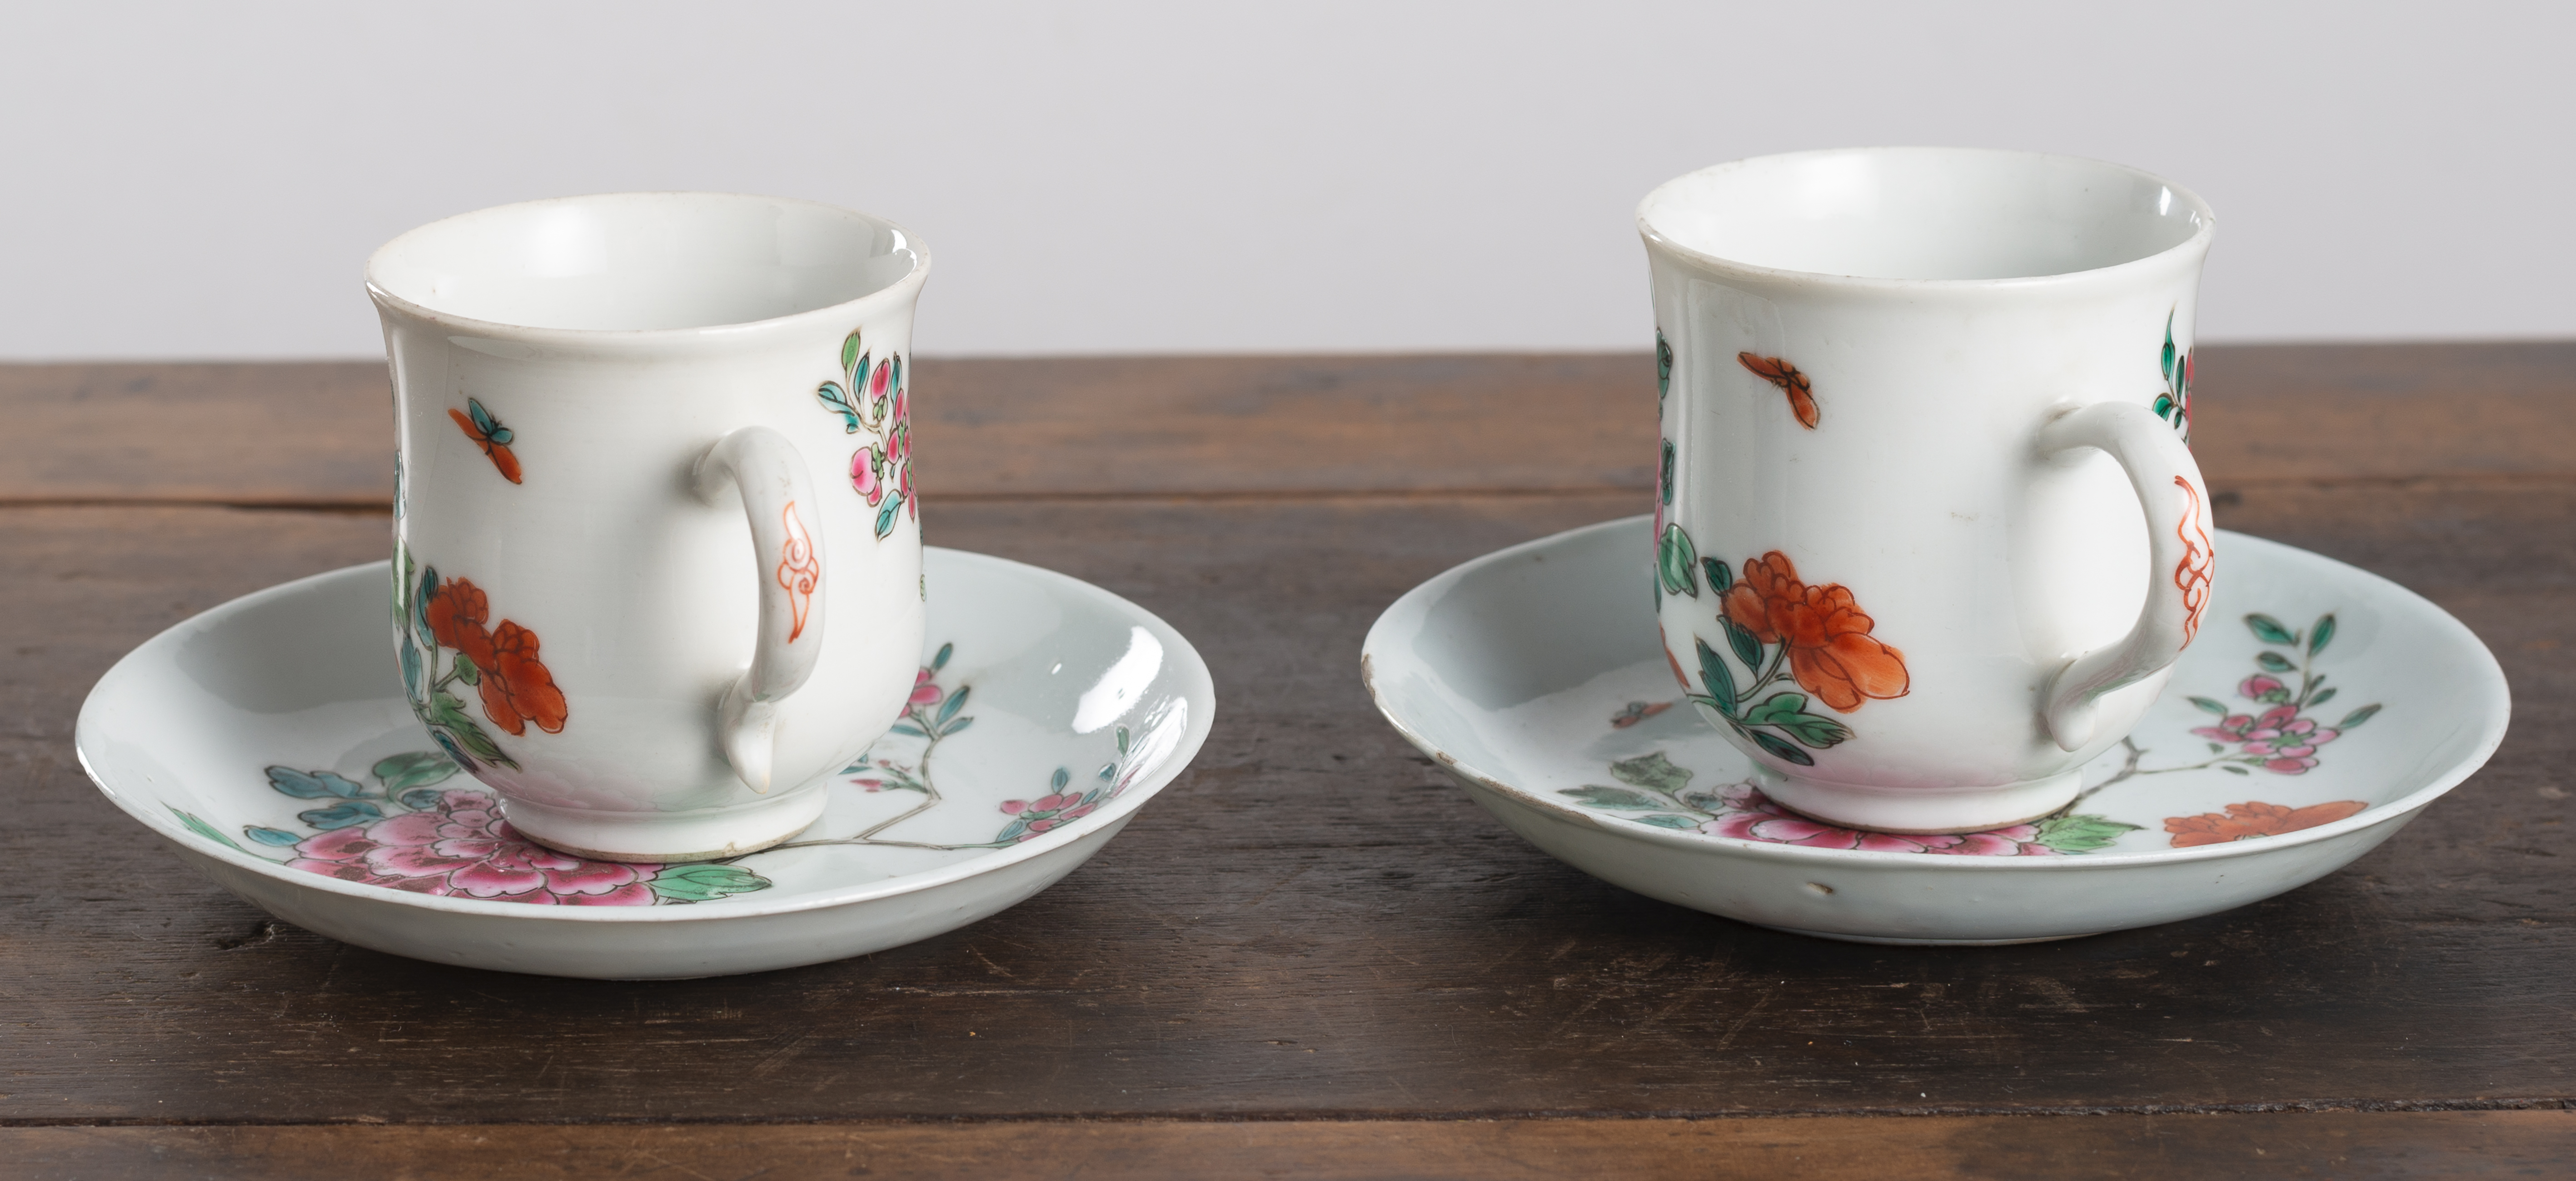 A PAIR OF 'FAMILLE ROSE' PORCELAIN CUPS AND SAUCERS - Image 2 of 4